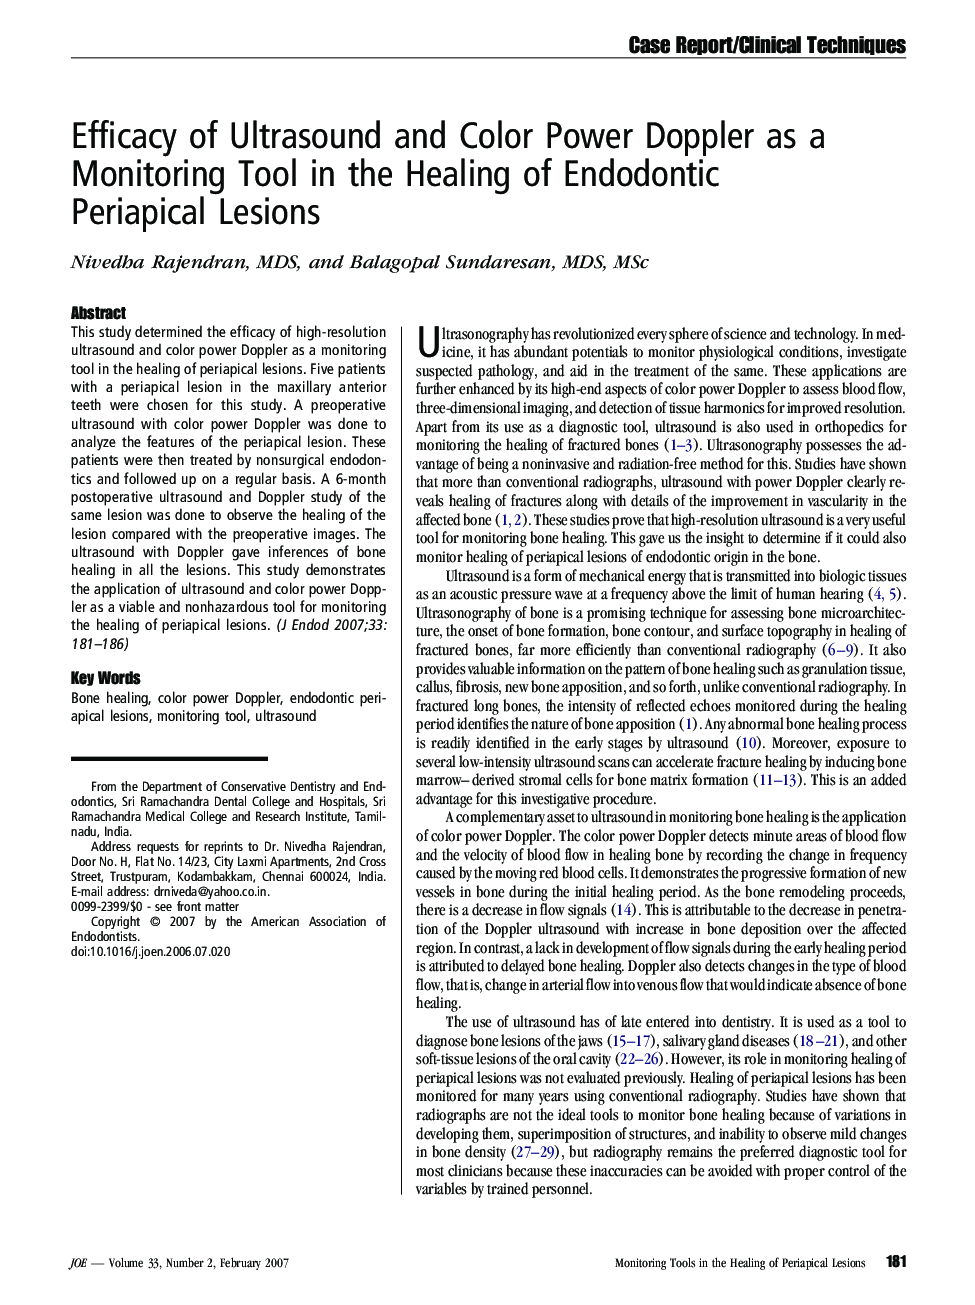 Efficacy of Ultrasound and Color Power Doppler as a Monitoring Tool in the Healing of Endodontic Periapical Lesions